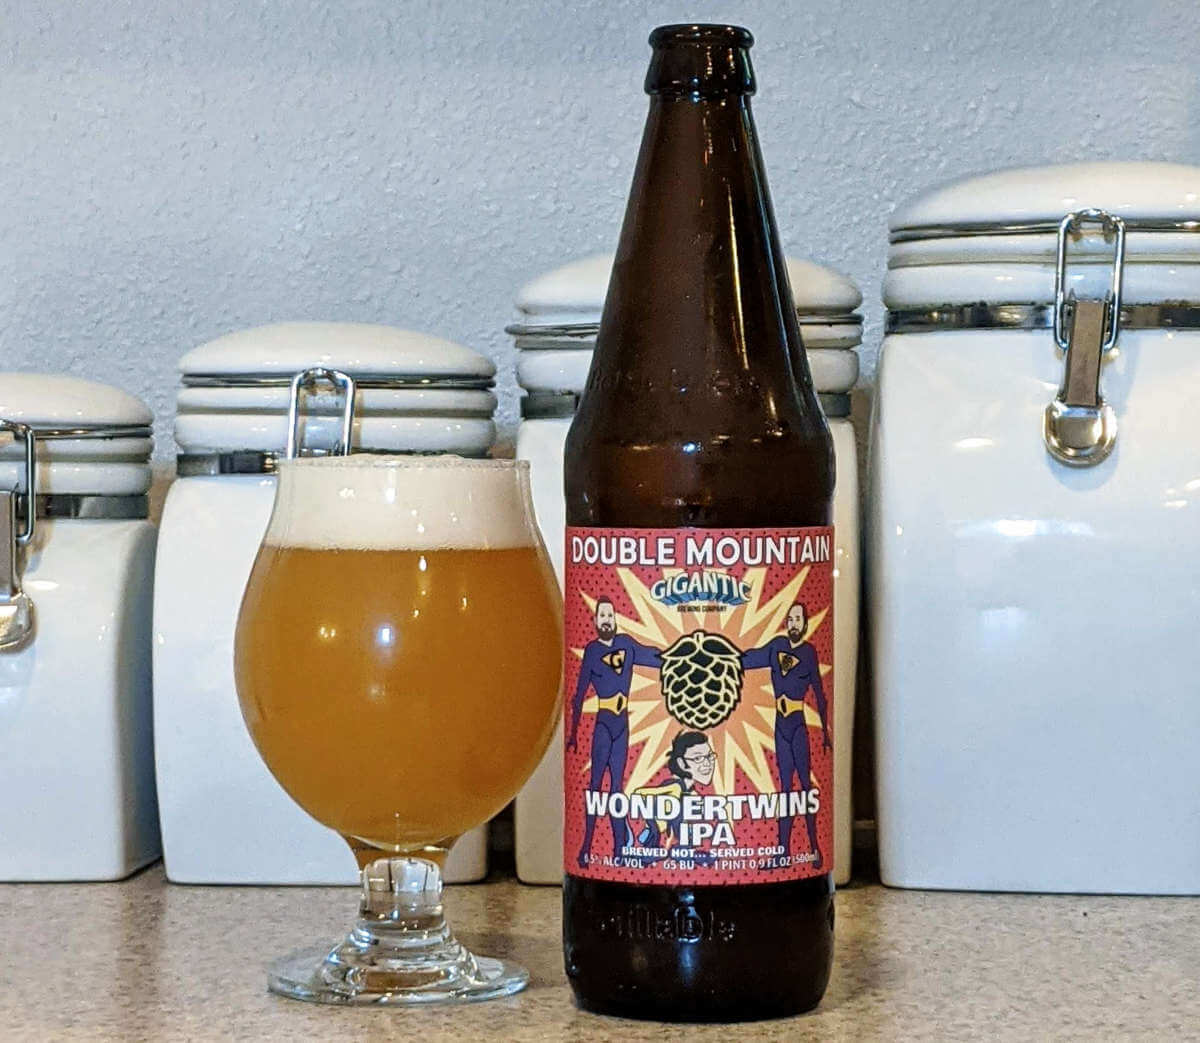 Double Mountain Brewery + Gigantic Brewing = Wondertwins IPA